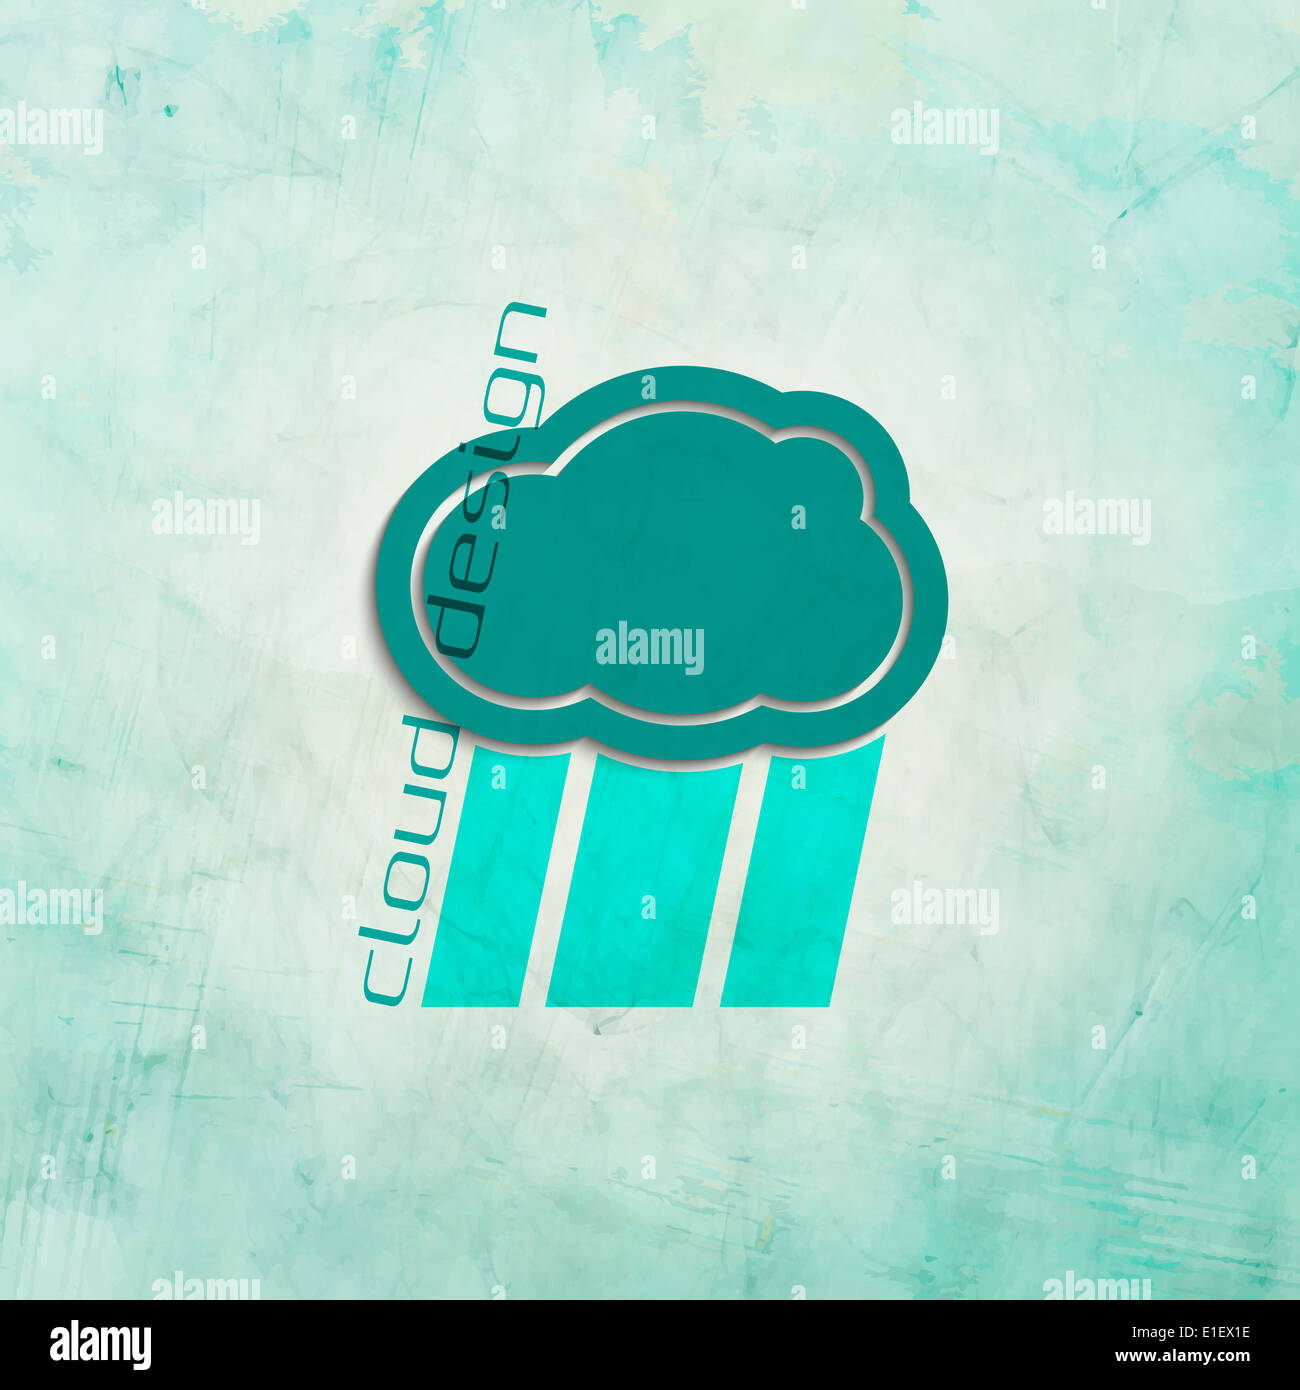 abstract cloud symbol on grunge, textured background Stock Photo